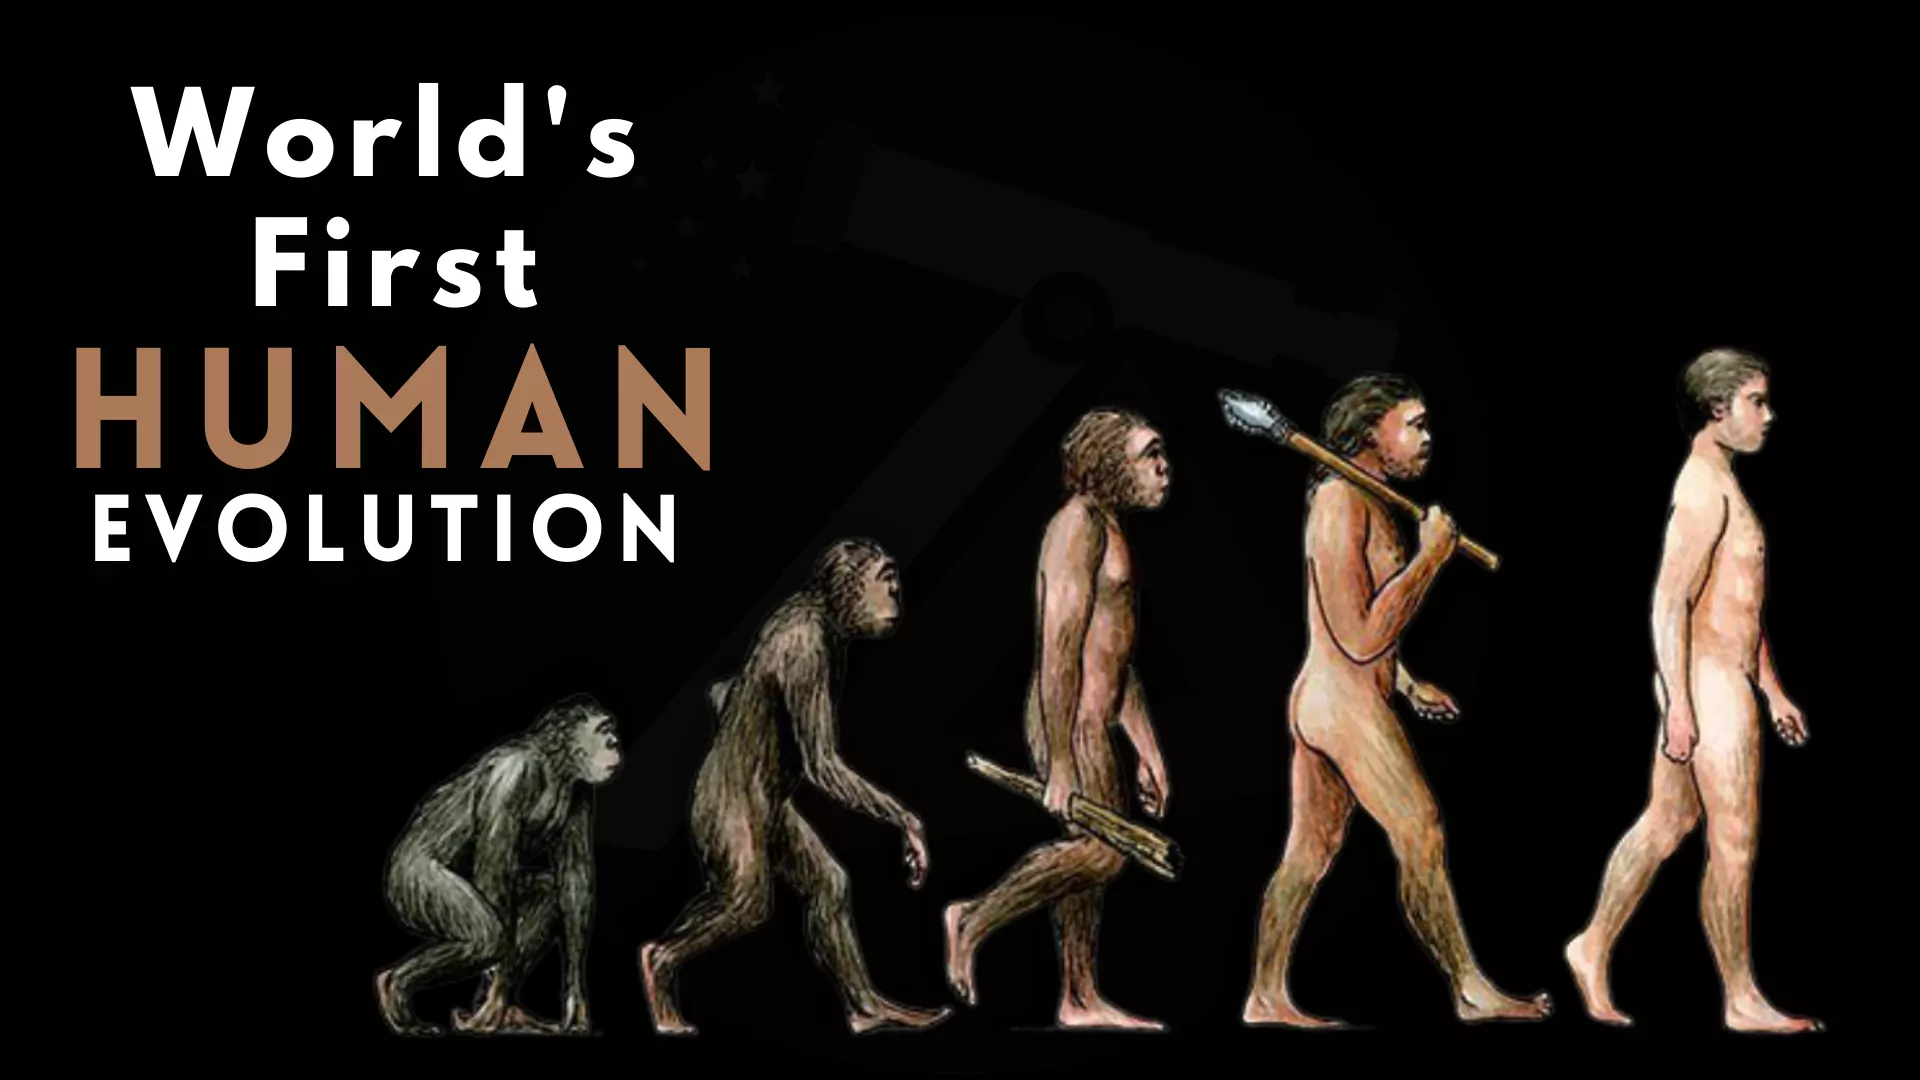 The World's First Human Evolution